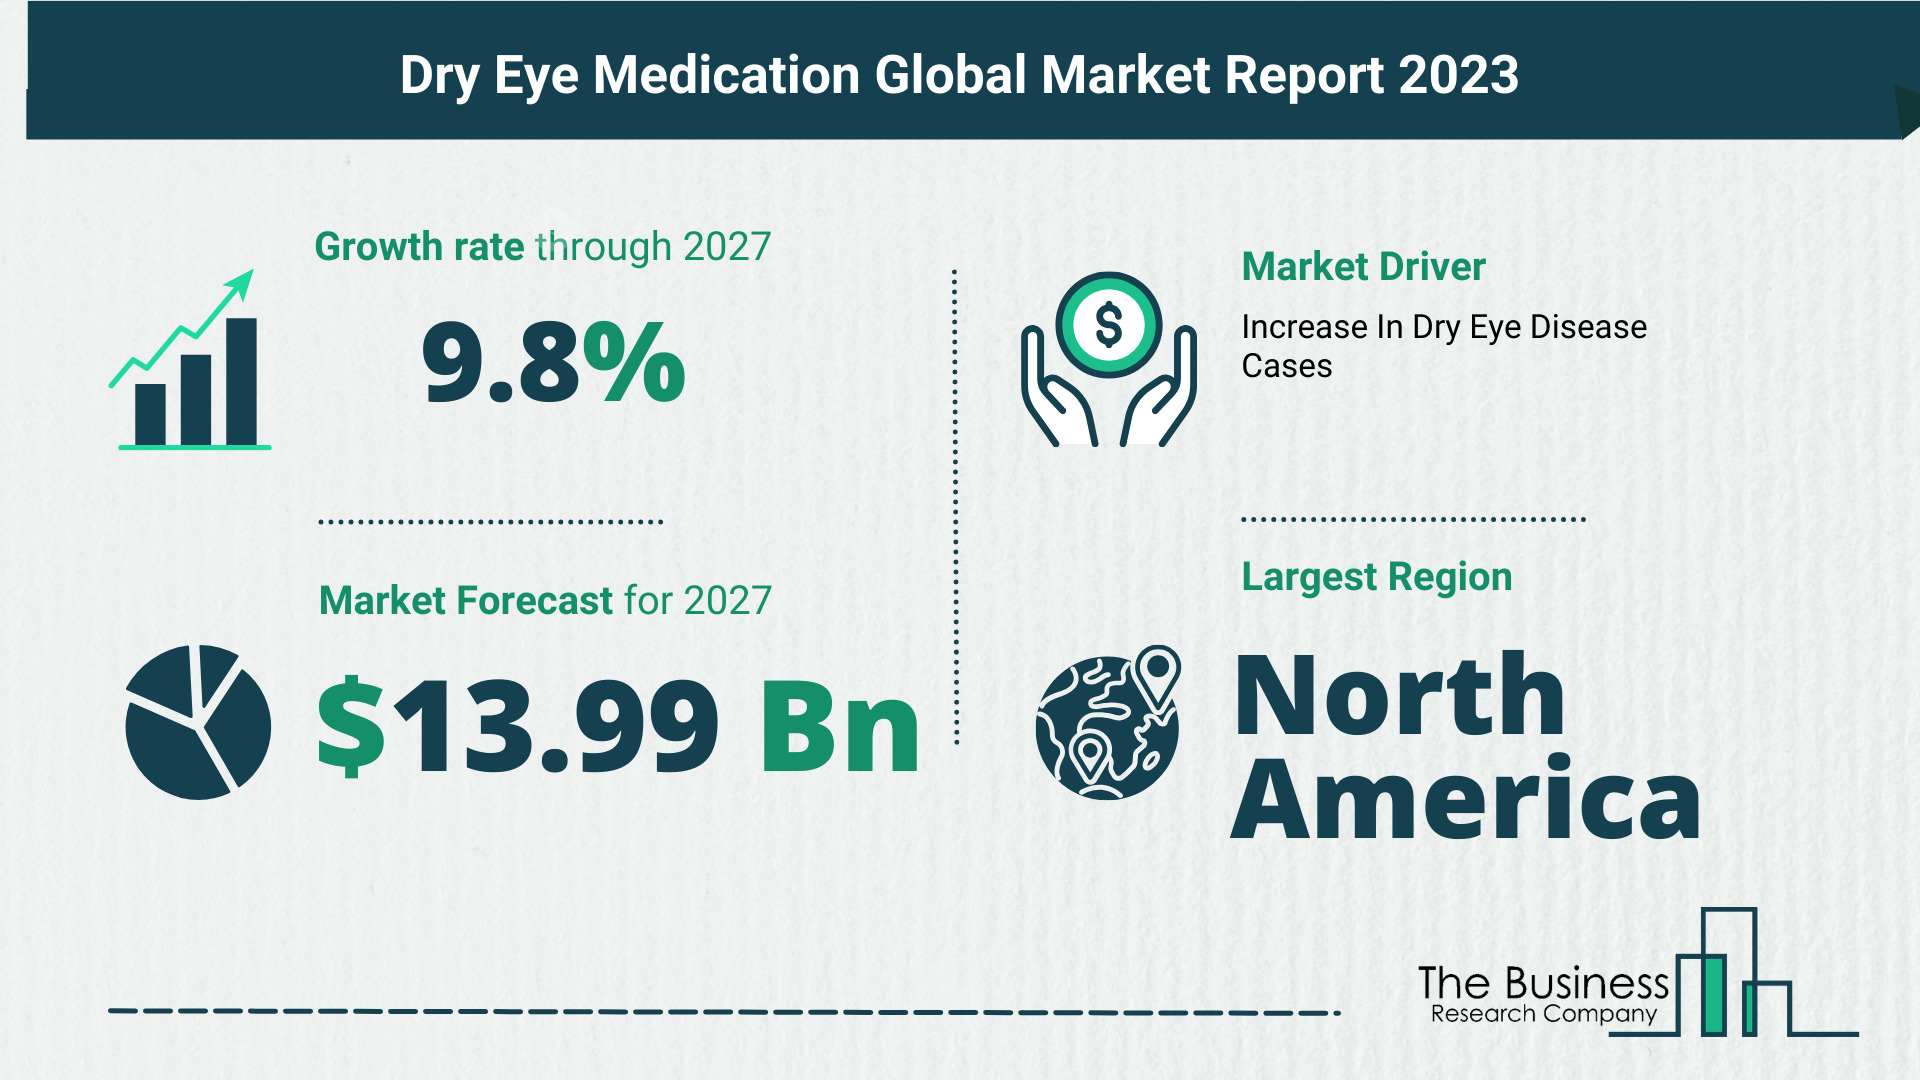 Key Trends And Drivers In The Dry Eye Medication Market 2023